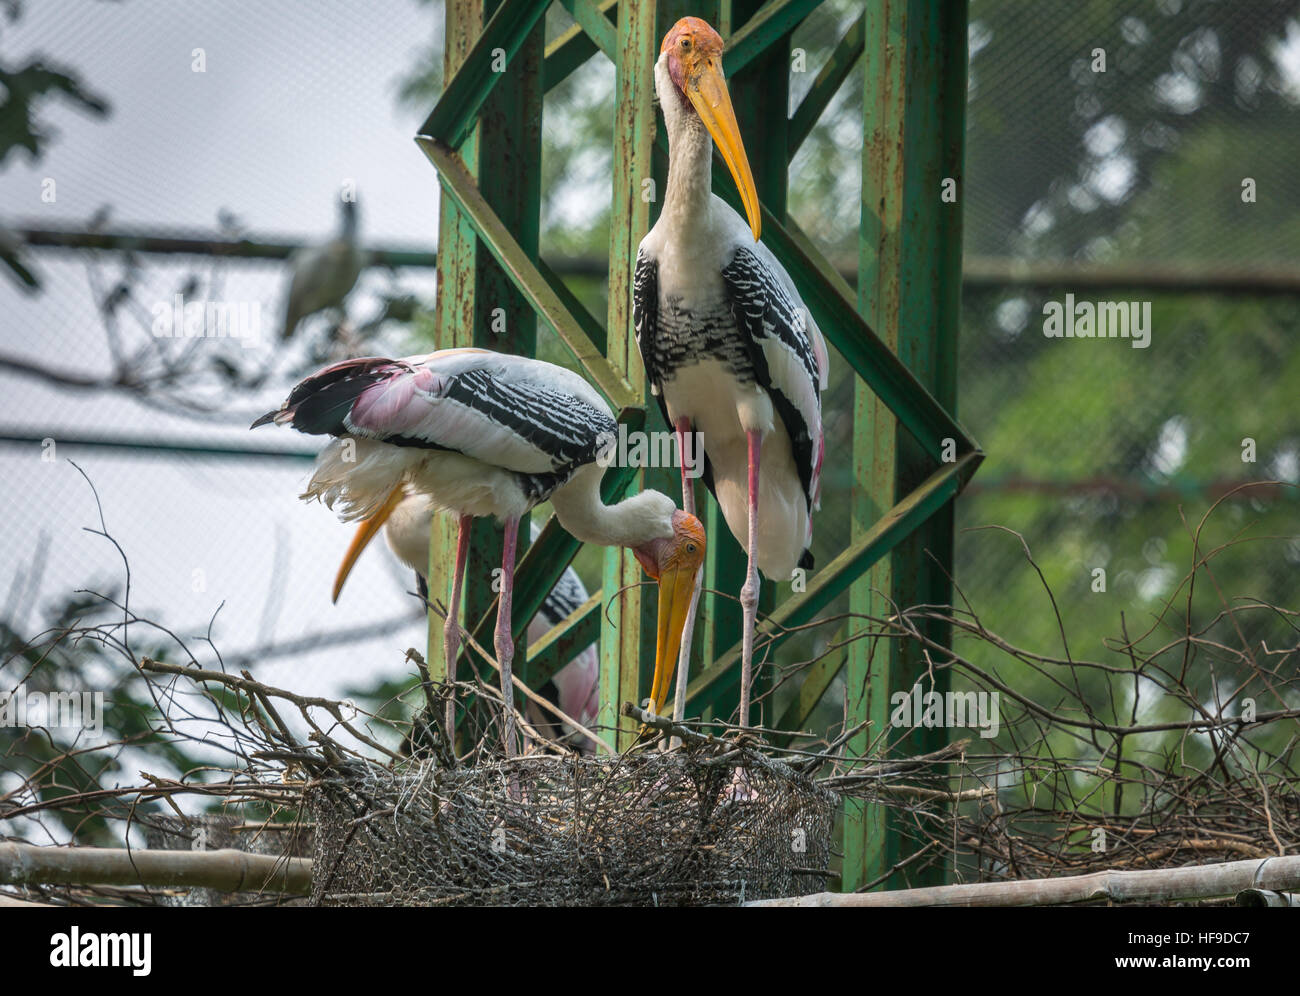 Yellow billed stork birds also known as the painted storks preparing their nest at a bird sanctuary in India. Stock Photo